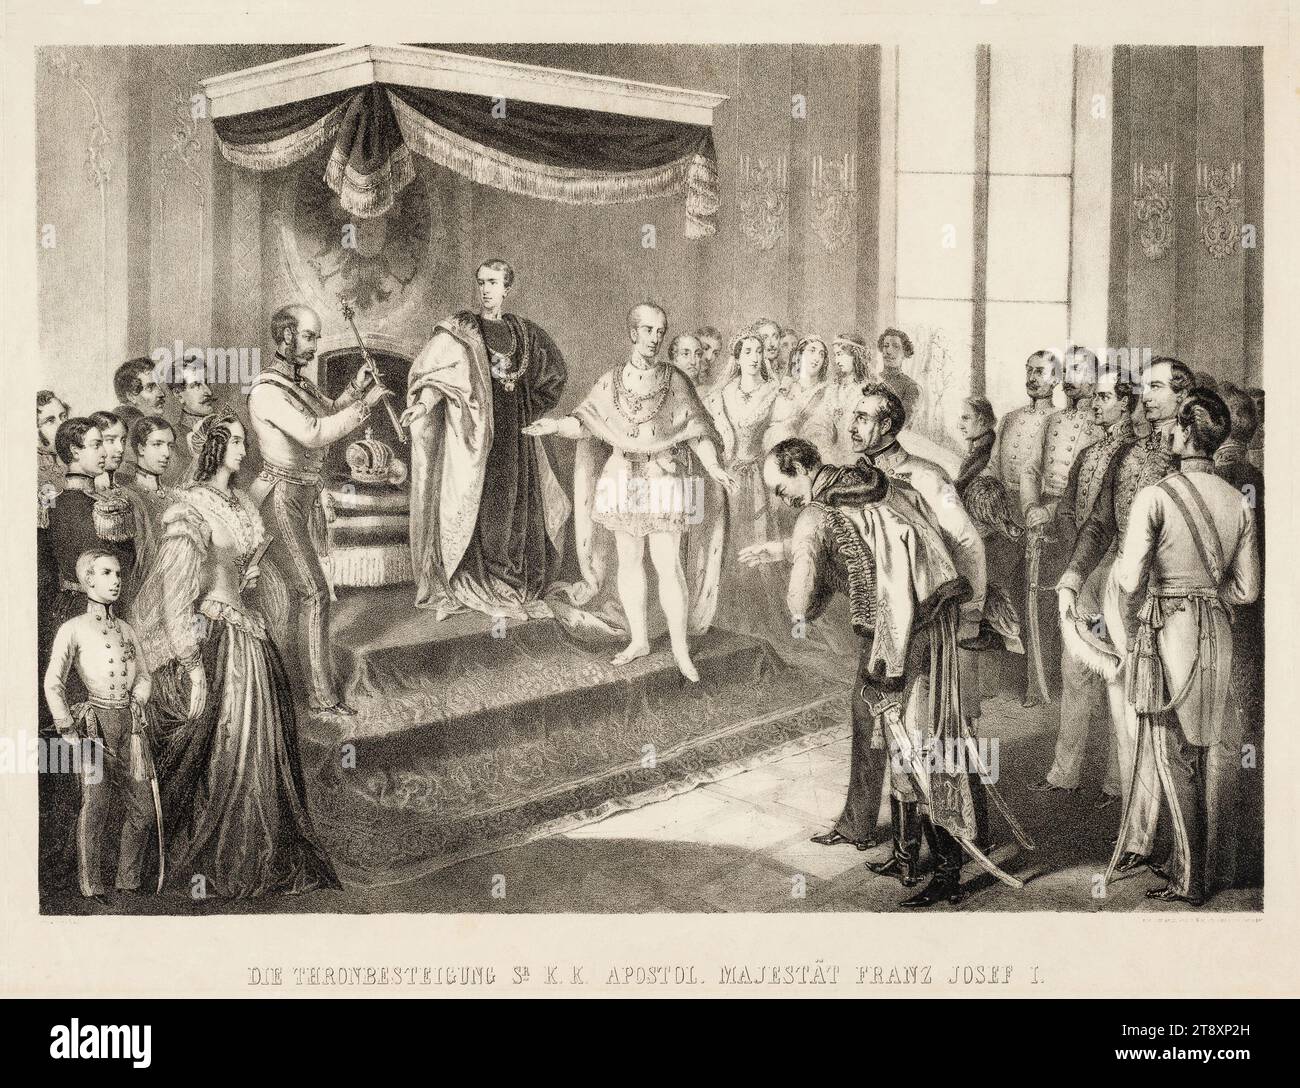 THE ACCESSION TO THE THRONE OF SR K. K. APOSTOL. MAJESTY FRANZ JOSEF I.' (on December 2, 1848) (depicting Archduke Franz Karl, Archduchess Sophie, Jelačić and Windischgrätz), Franz Kollarz (Kolář) (1825-1894), lithographer, A. Härtinger, printer, 1848-1849, paper, chalk lithograph, height 43.7 cm, width 54 cm, Dynastic events, Habsburgs, politics, family, revolutions of 1848, 1849, fine arts, throne, coronation of ruler, man, king; emperor, ruler, sovereign, Emperor Franz Joseph I., The Vienna Collection Stock Photo